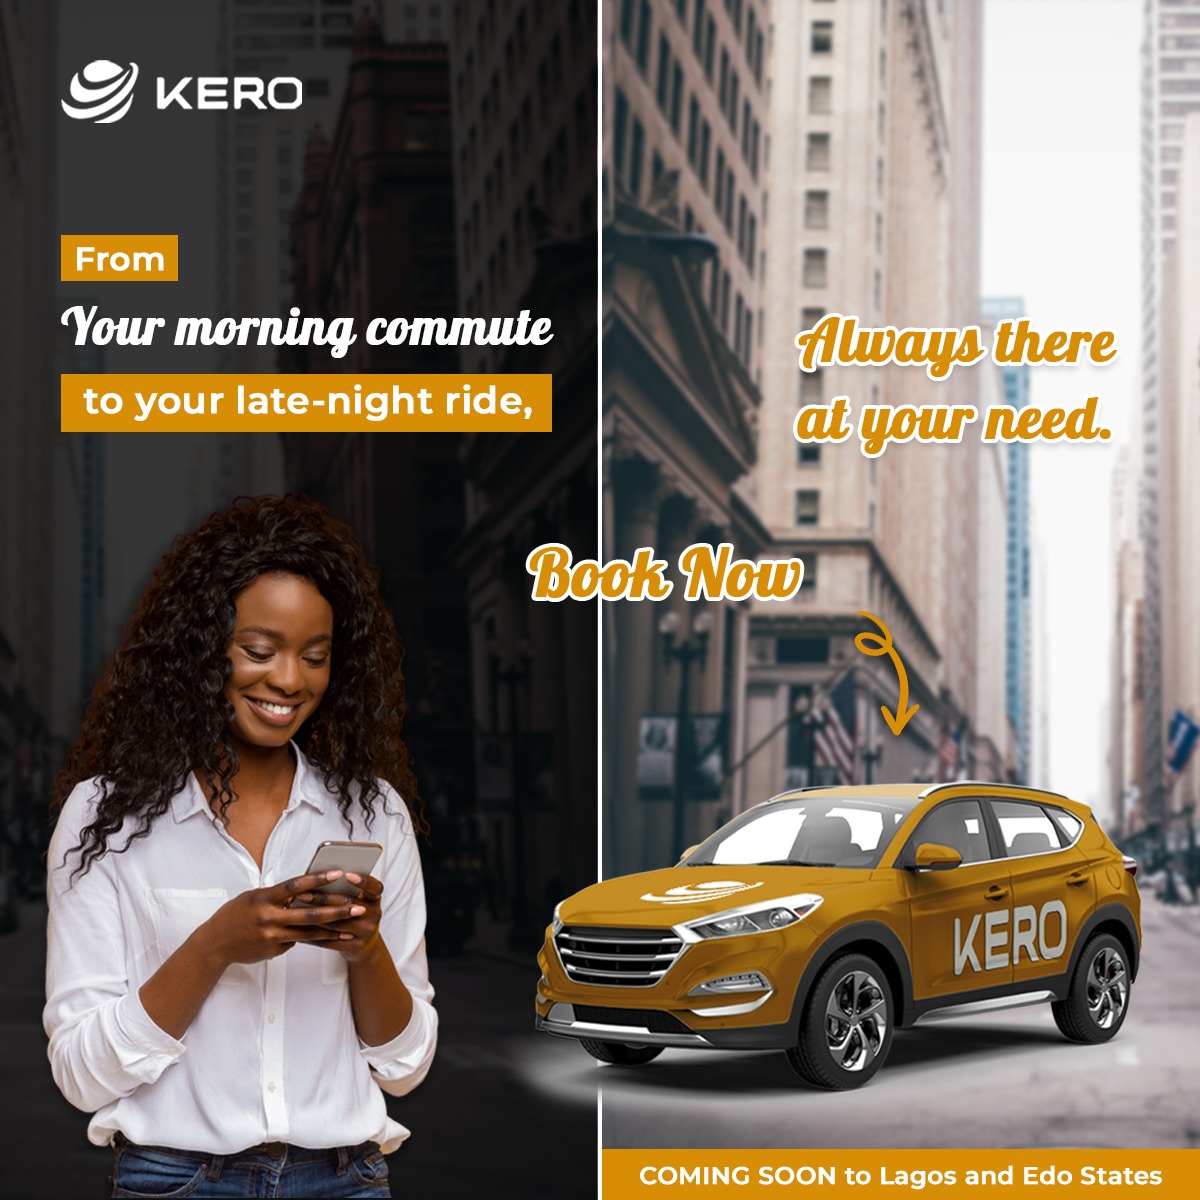 From your morning commute to your late-night ride, Kero is always there when you need us. Reliable, affordable, and ready to serve 🚕 ! Coming soon to Lagos and Edo States Nigeria. #nigeria #nigerianbusiness #taxiservices #lagosbusiness #lagos #edo #taxi #taxidriver #African